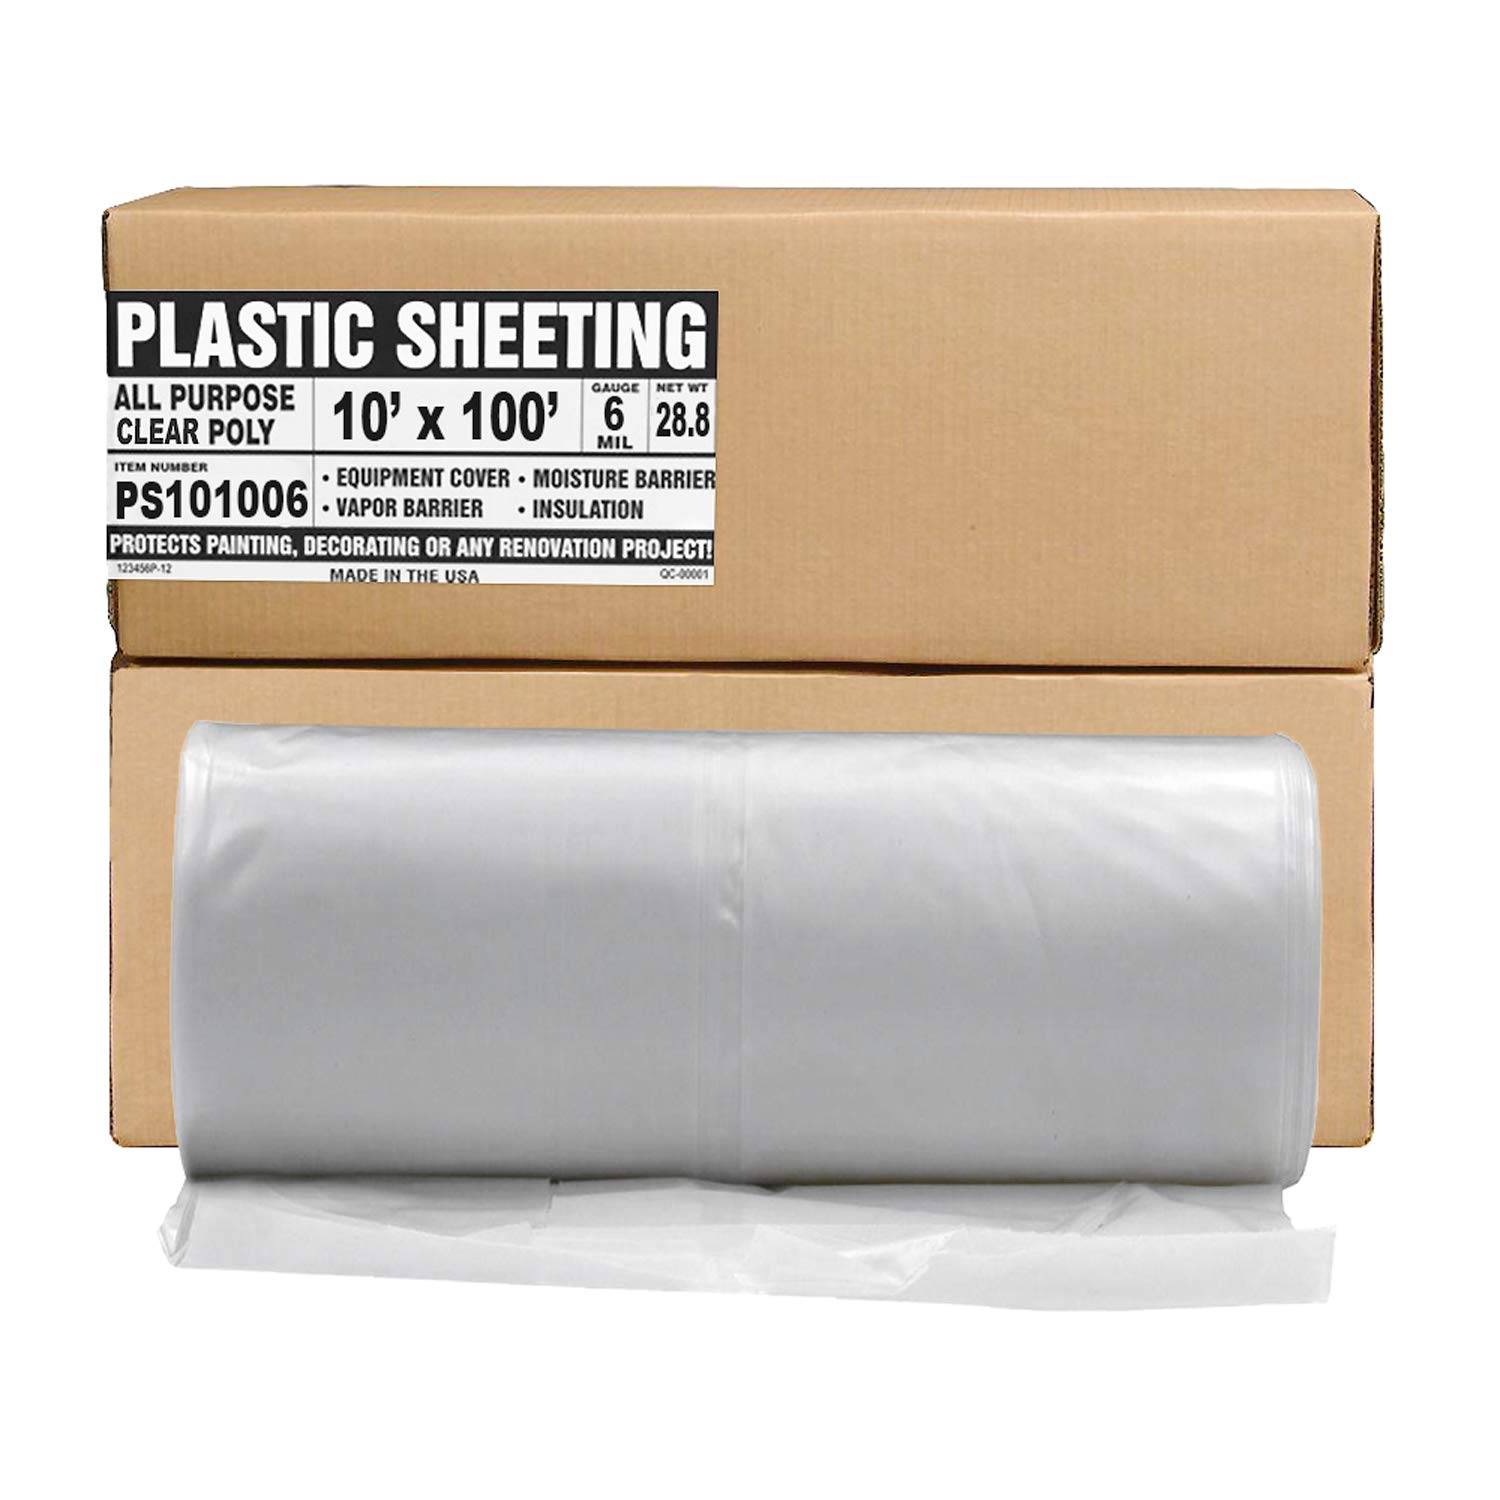 Aluf Plastics Plastic Sheeting - 10' x 100', 6 MIL Heavy Duty Gauge - Clear Vapor and Moisture Barrier Sheet Tarp/Drop Cloth for Painting, Furniture Covers, Carpet Cover, Floor, Paint, Painters